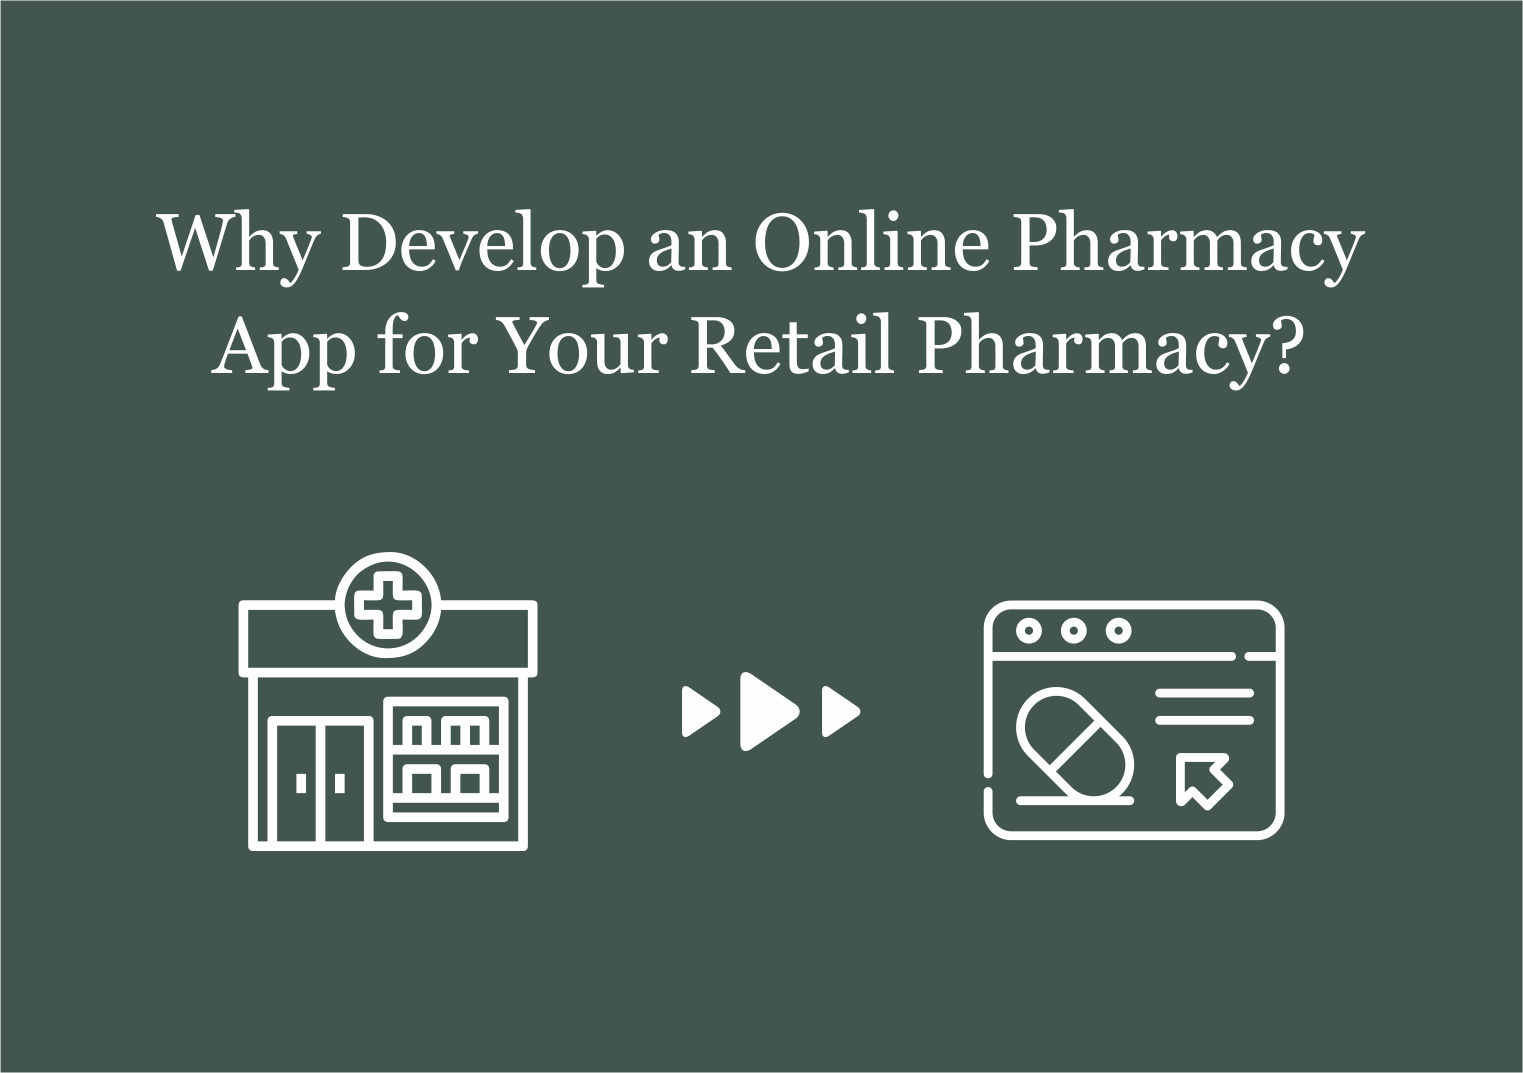 Is it legal to buy prescription drugs from an online pharmacy in the USA